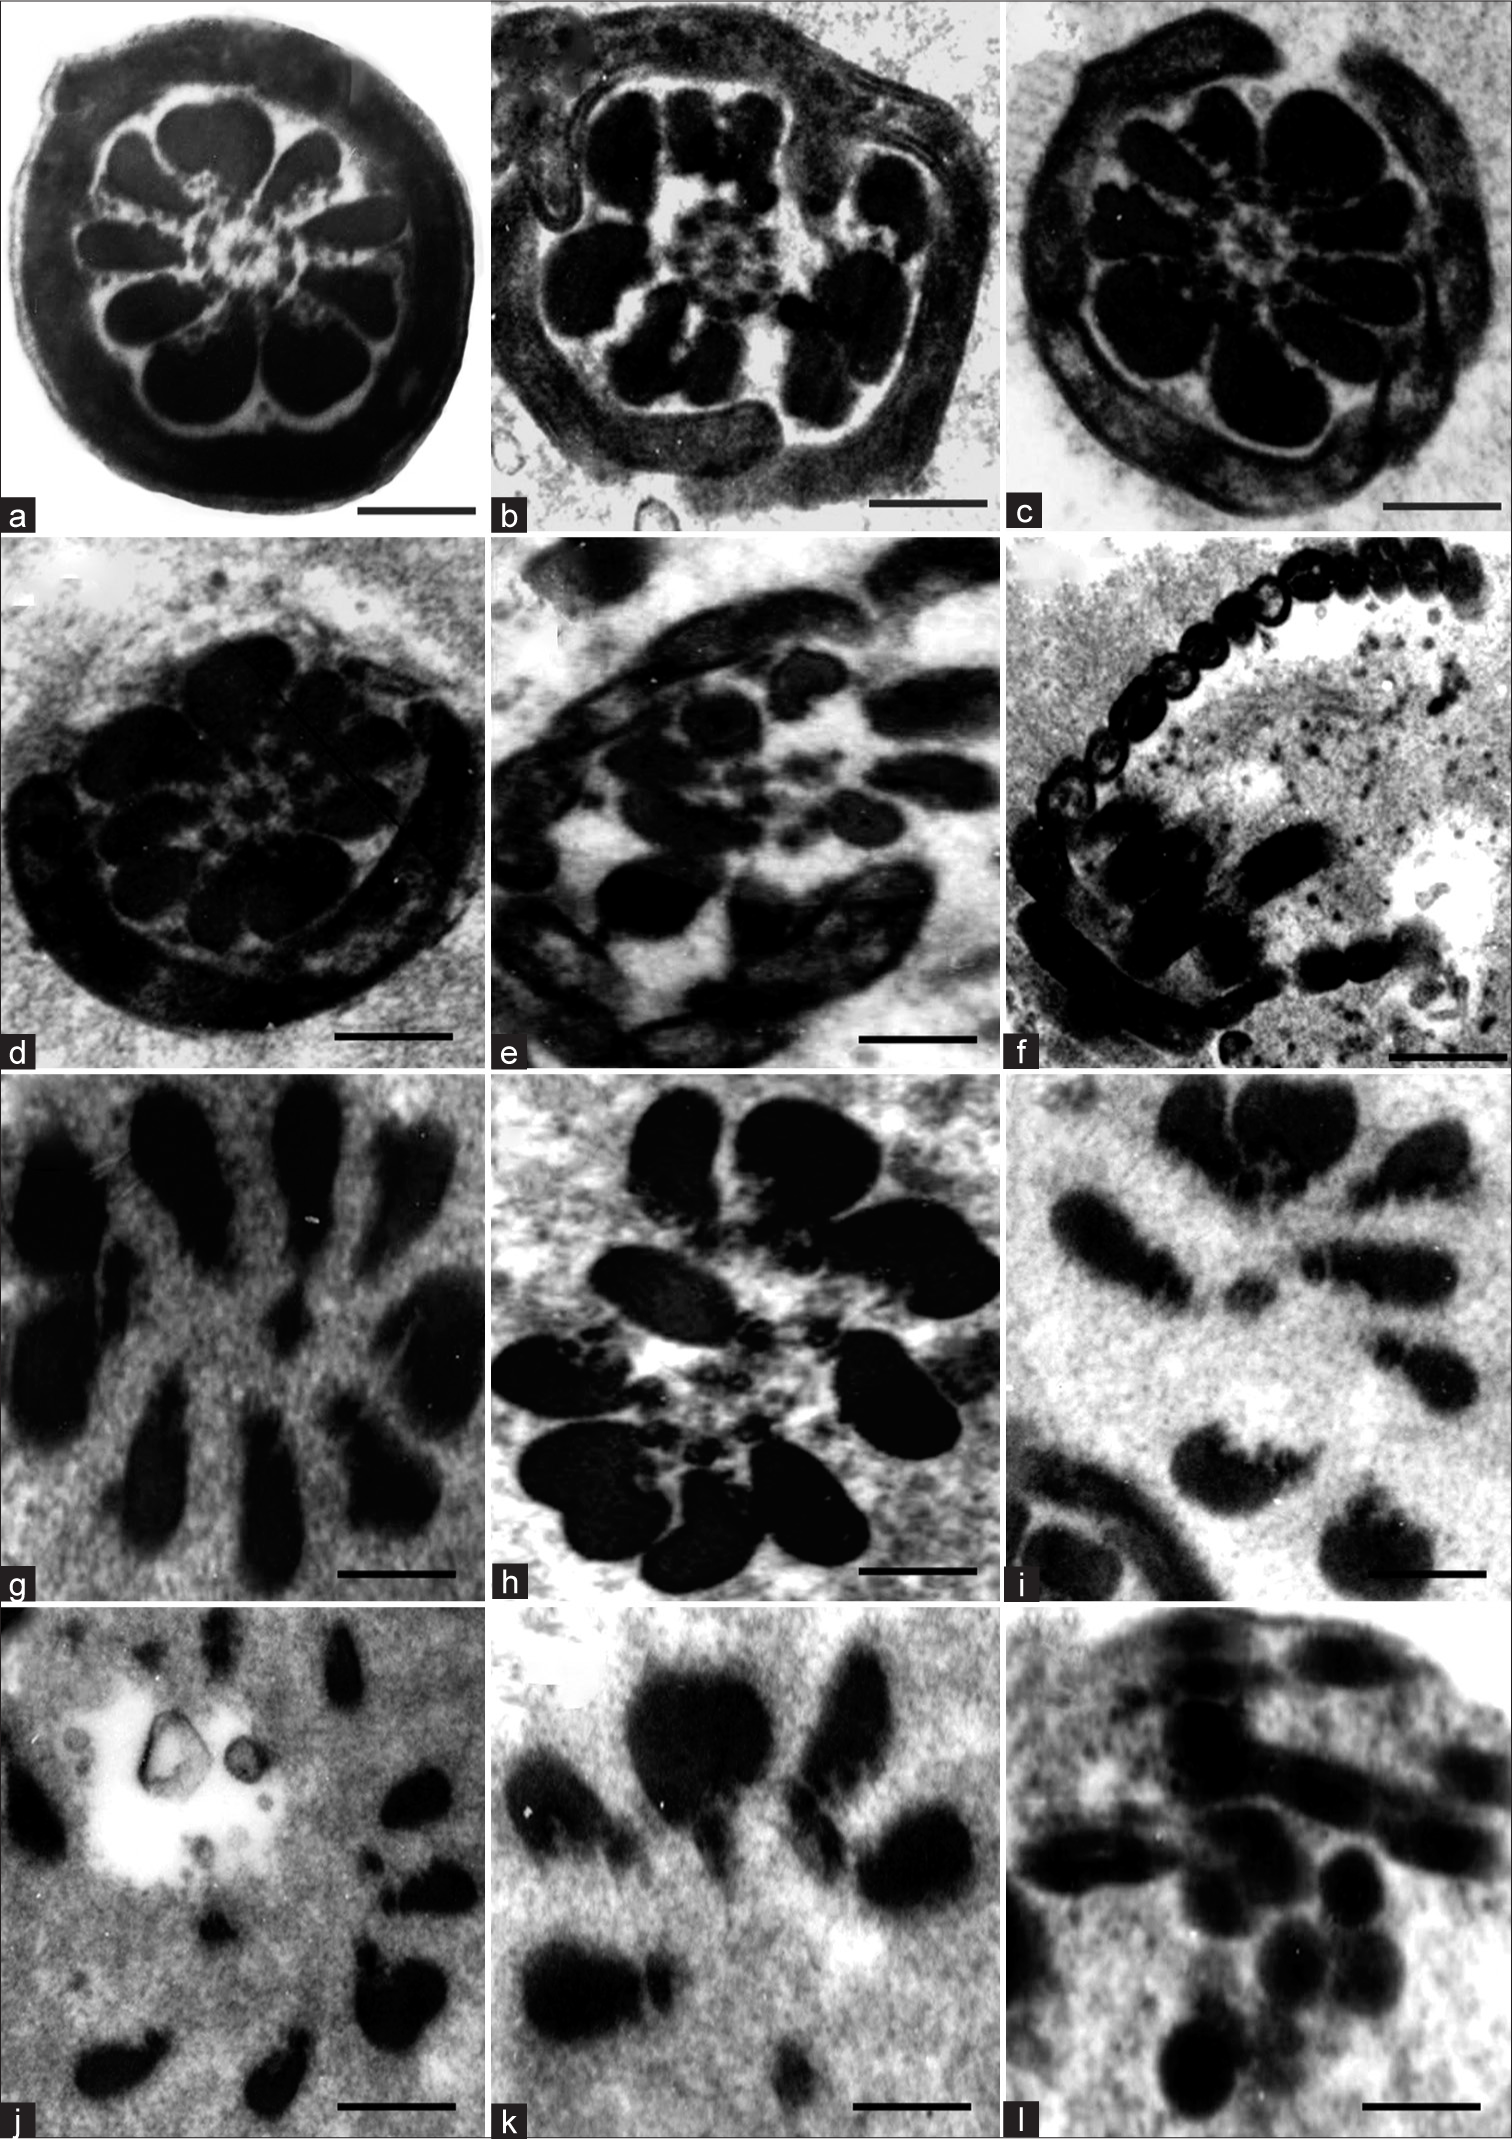 (a) Transmission electron micrograph (TEM) of Transverse section (TS) of mid-piece of control sperm. (b–l) TEM of mid-piece of matrix-embedded spermatozoa in disintegration, showing the tentative sequence of changes. (g–l) Suggests that outer dense fibers are rather resistant to disintegration. Scale bar a–e 0.3 μm, f 0.4 μm, g-l 0.25 μm.